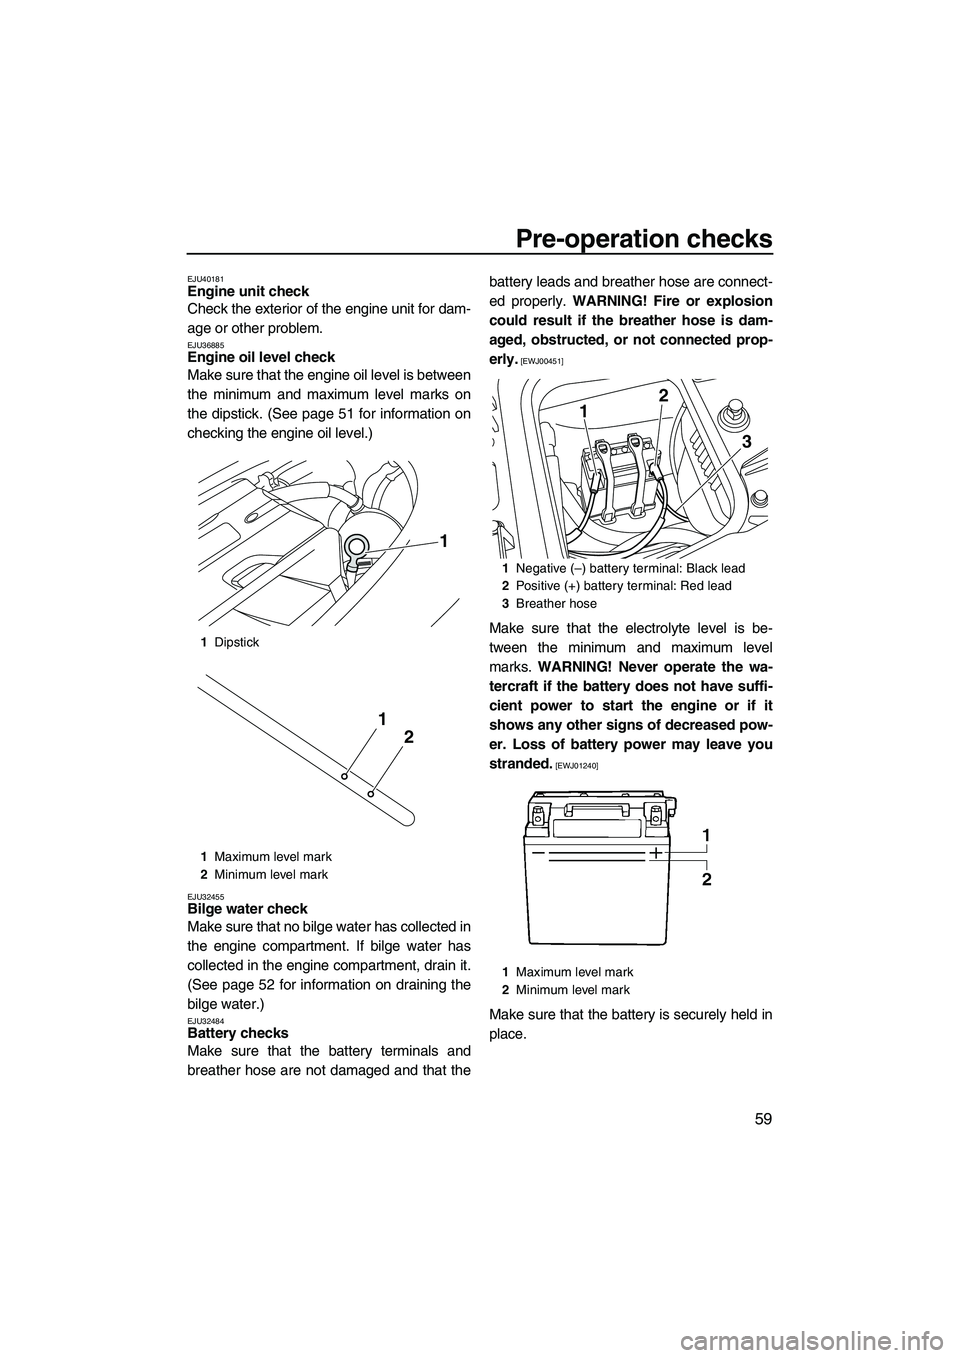 YAMAHA FZS 2013  Owners Manual Pre-operation checks
59
EJU40181Engine unit check 
Check the exterior of the engine unit for dam-
age or other problem.
EJU36885Engine oil level check 
Make sure that the engine oil level is between
t